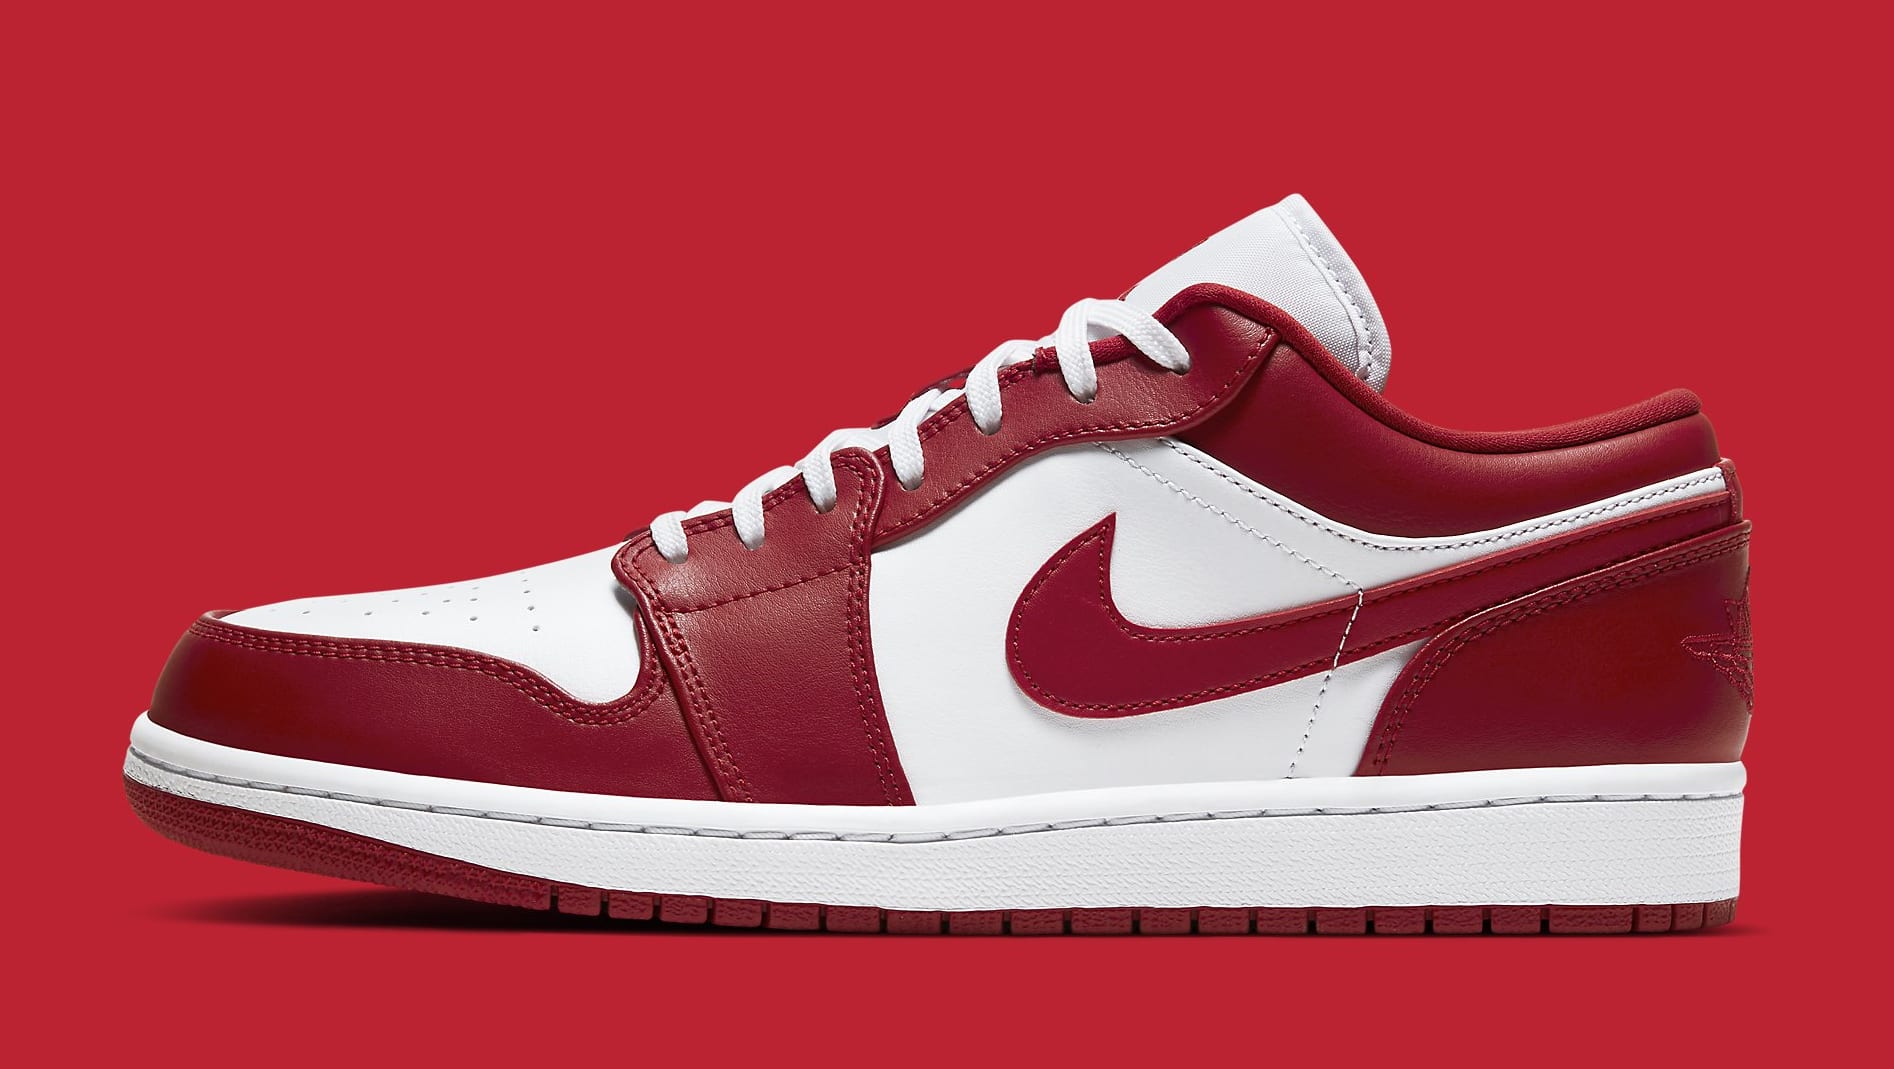 Air Jordan 1 Low &quot;Gym Red&quot; Coming Soon: Official Photos